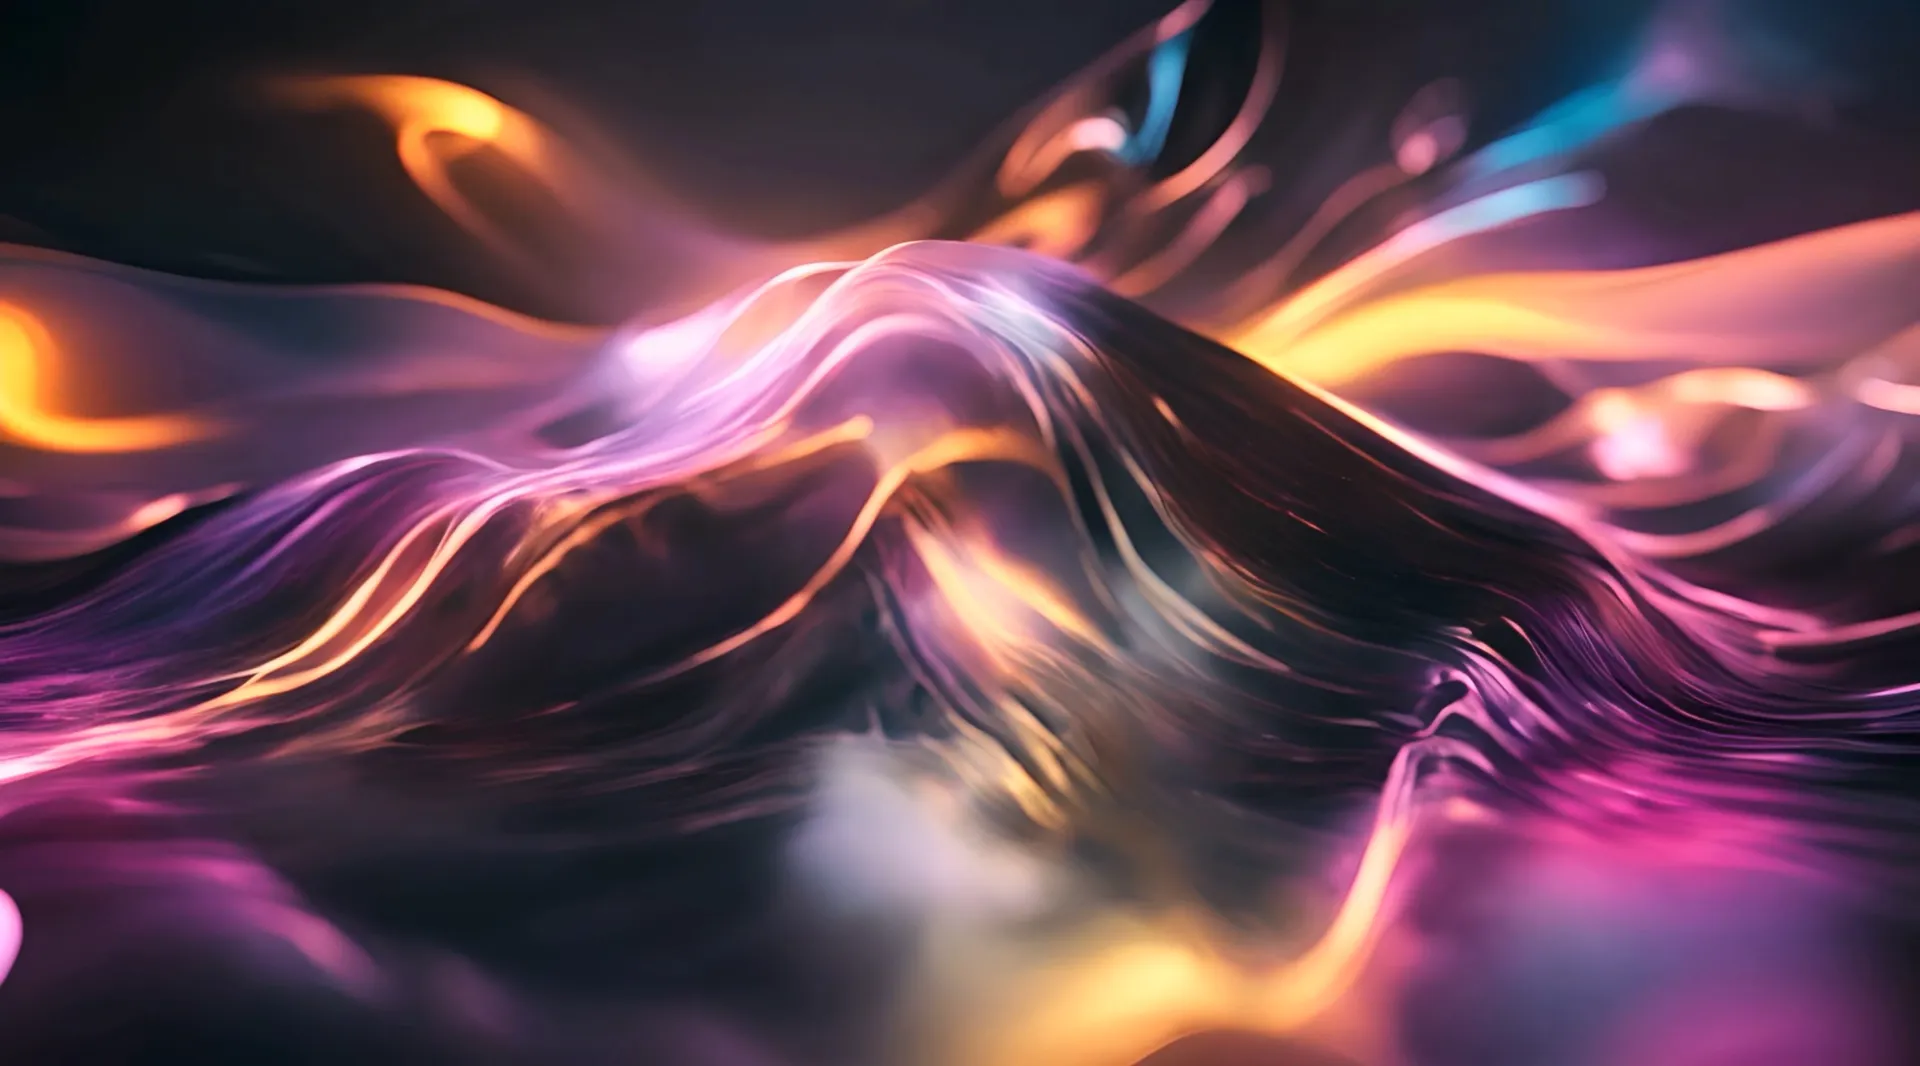 Vibrant Abstract Energy Waves Video Backdrop